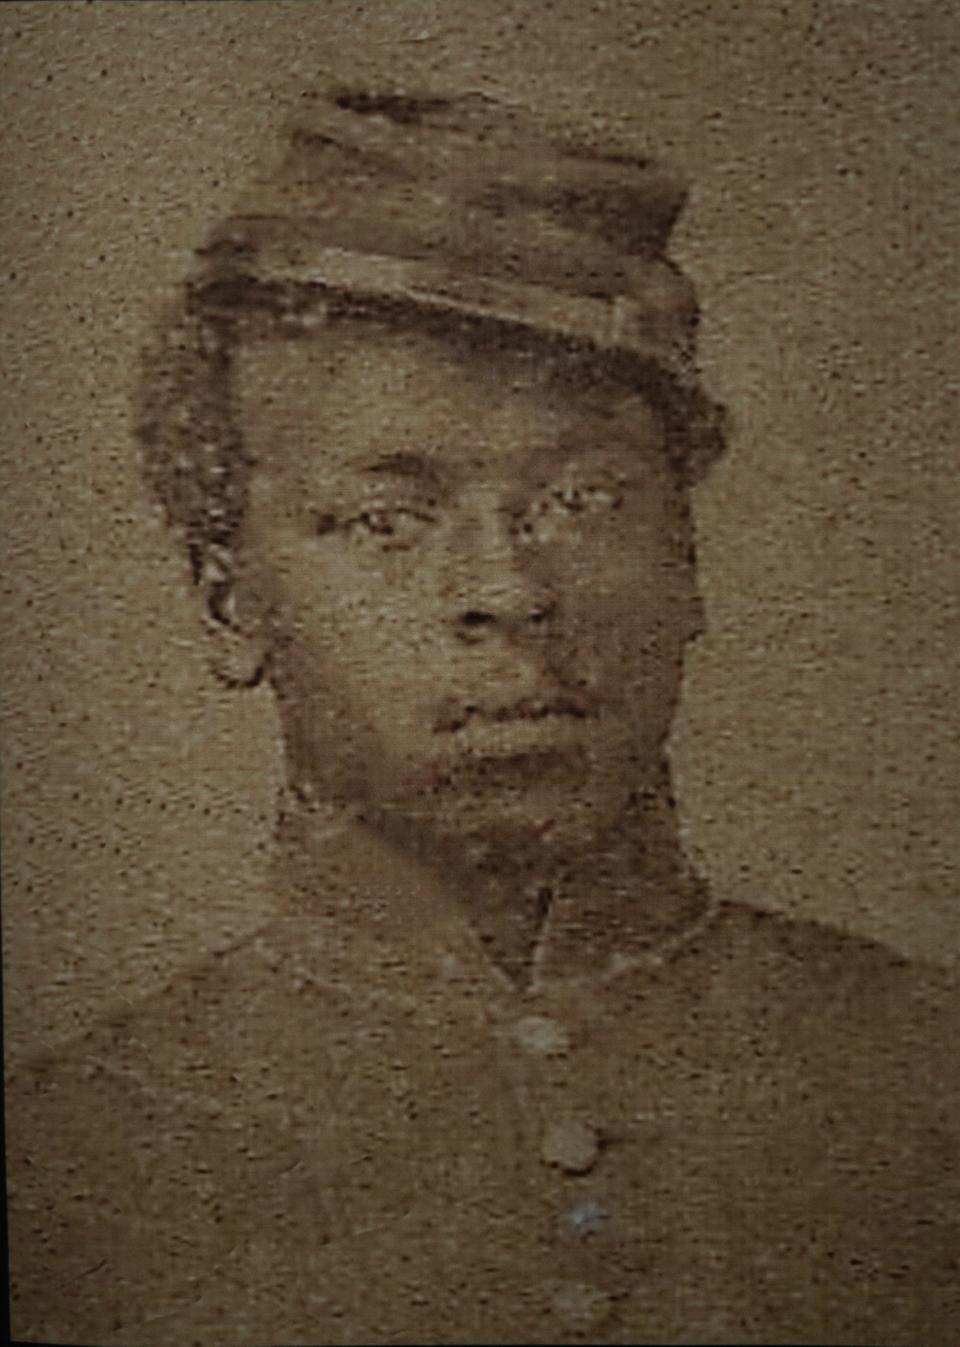 A photo of Civil War veteran Sgt. Hiram White of the 25th U.S. Colored Infantry Regiment of the U.S. Army taken by his commanding officer after White and 16 other soldiers helped nurse their gravely ill commander back to health during battle.